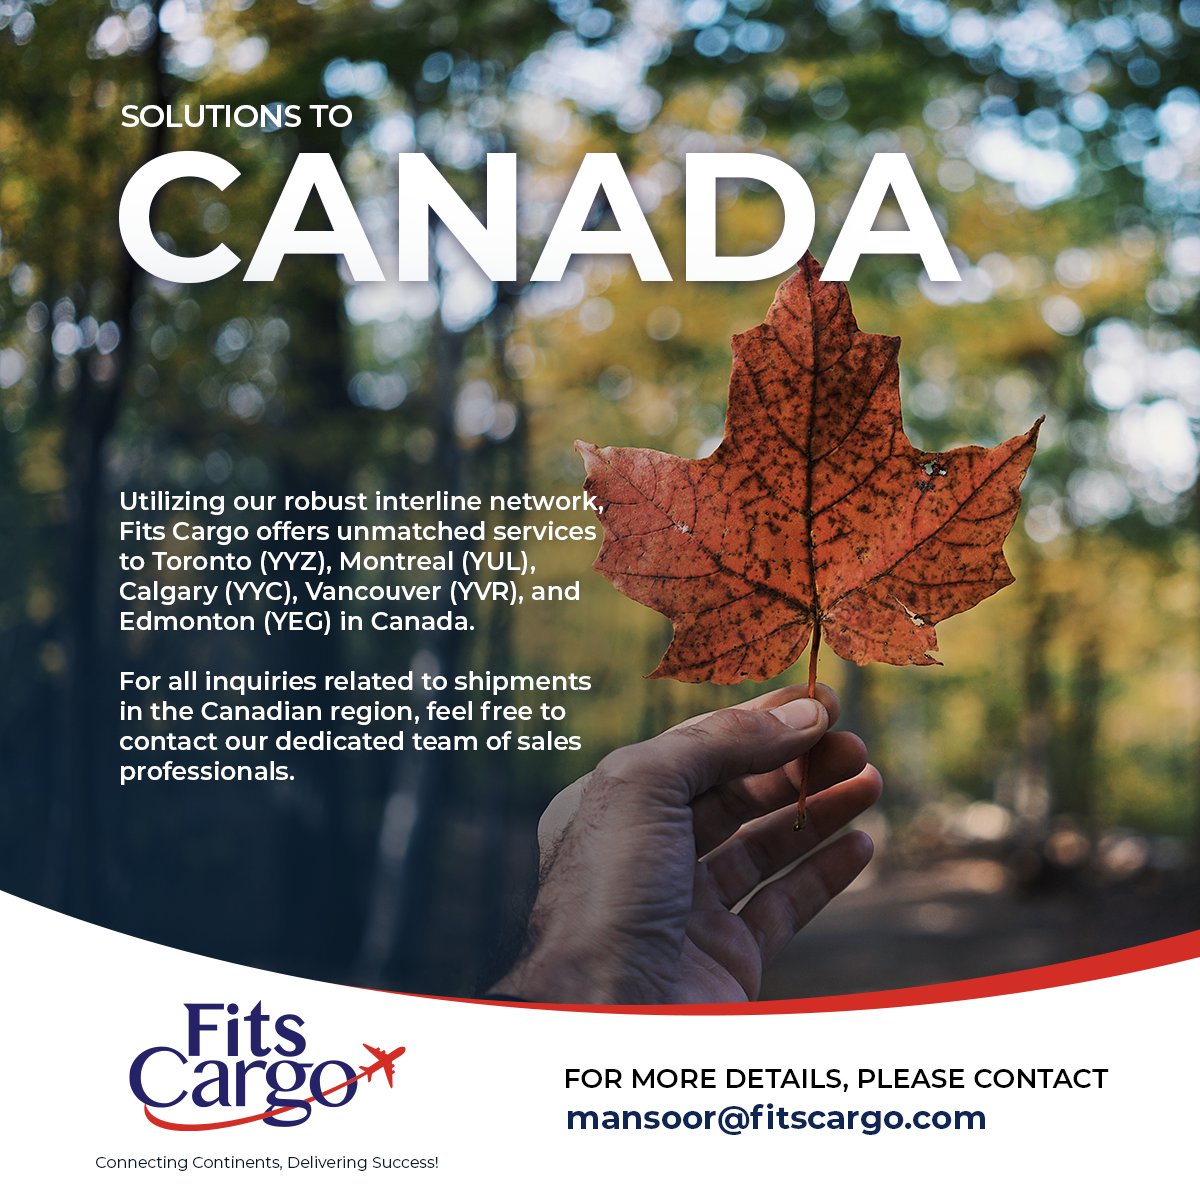 For any Air export shipments from BOM, COK or GOI to any Canadian Airport, please feel free to contact me on mansoor@fitscargo.com #Aircargo #Export #Airfreight #import #logistics #Freightforwarding #Supplychain #Pharmaexport #Bamako #Mali #PharmaceuticalManufacturing